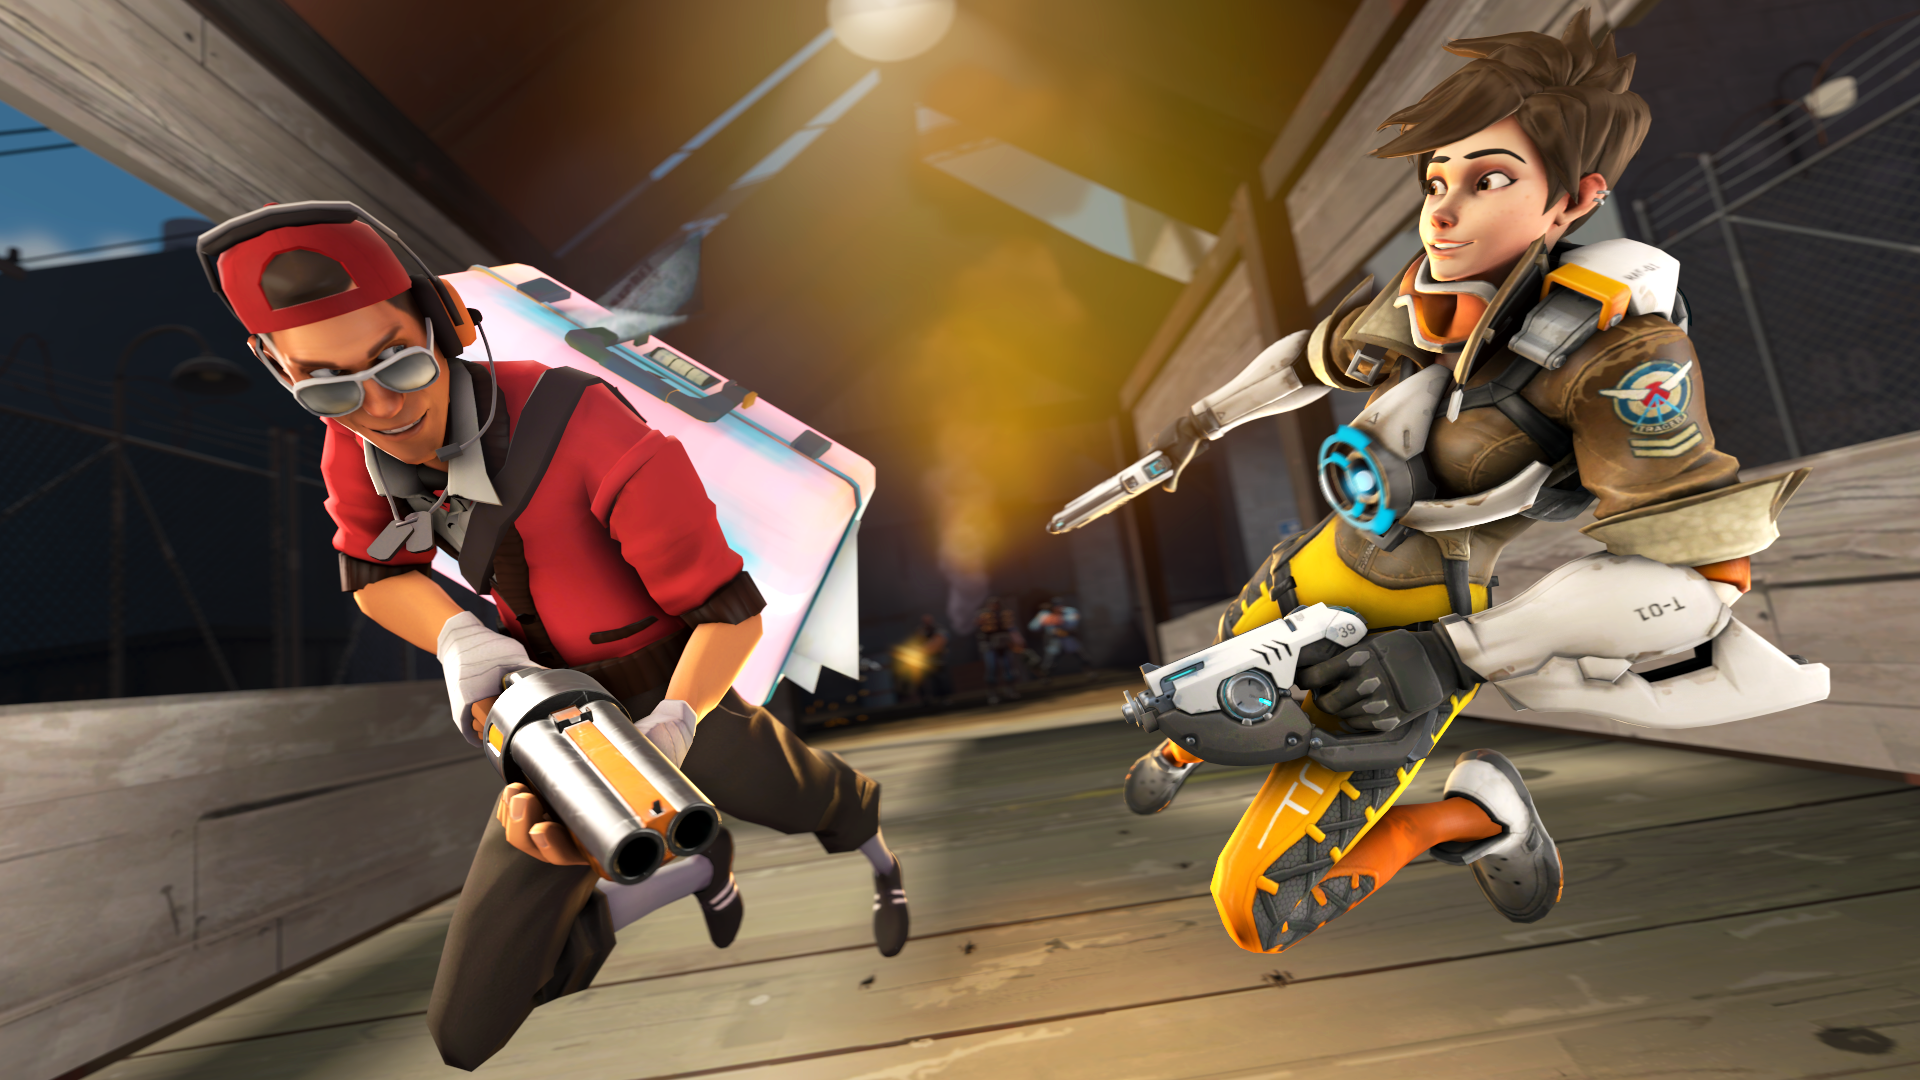 Scout Team Fortress Tracer Overwatch 1920x1080